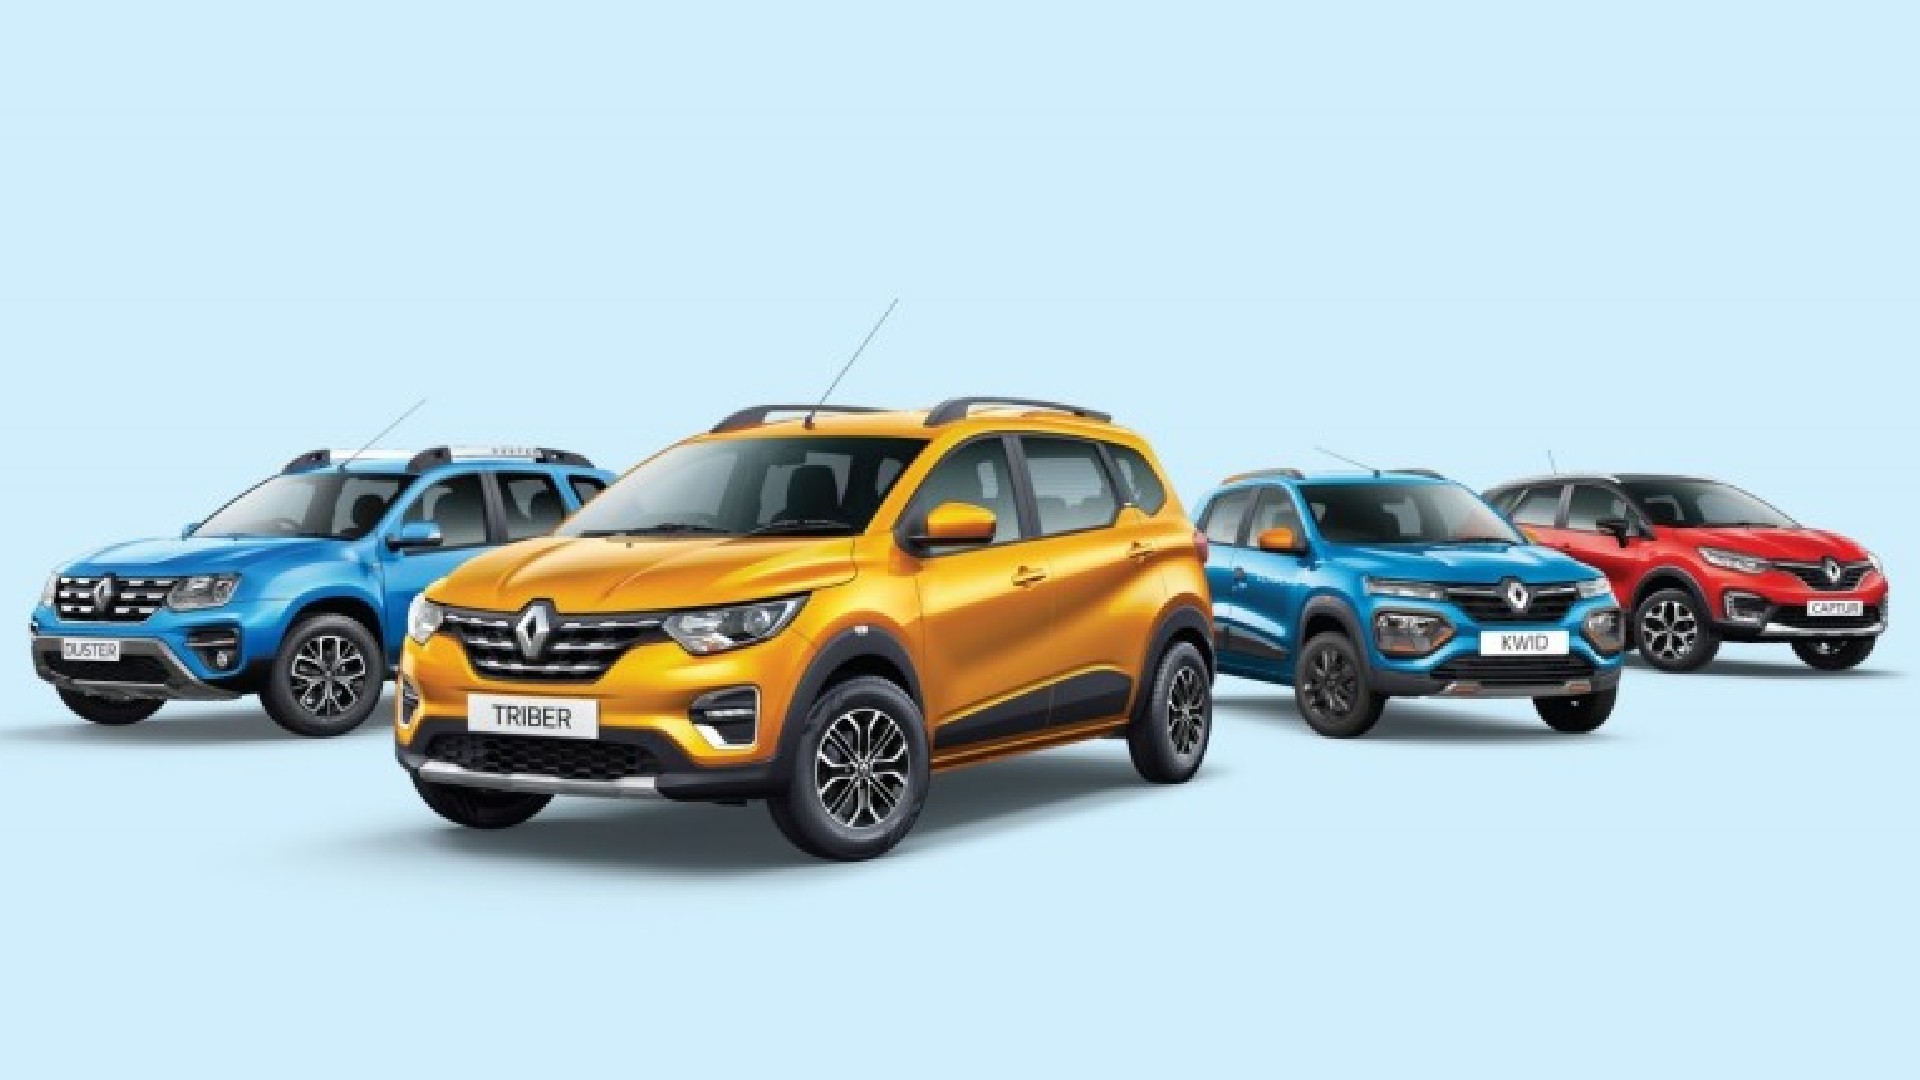 Renault India extends free service, warranty period by two months